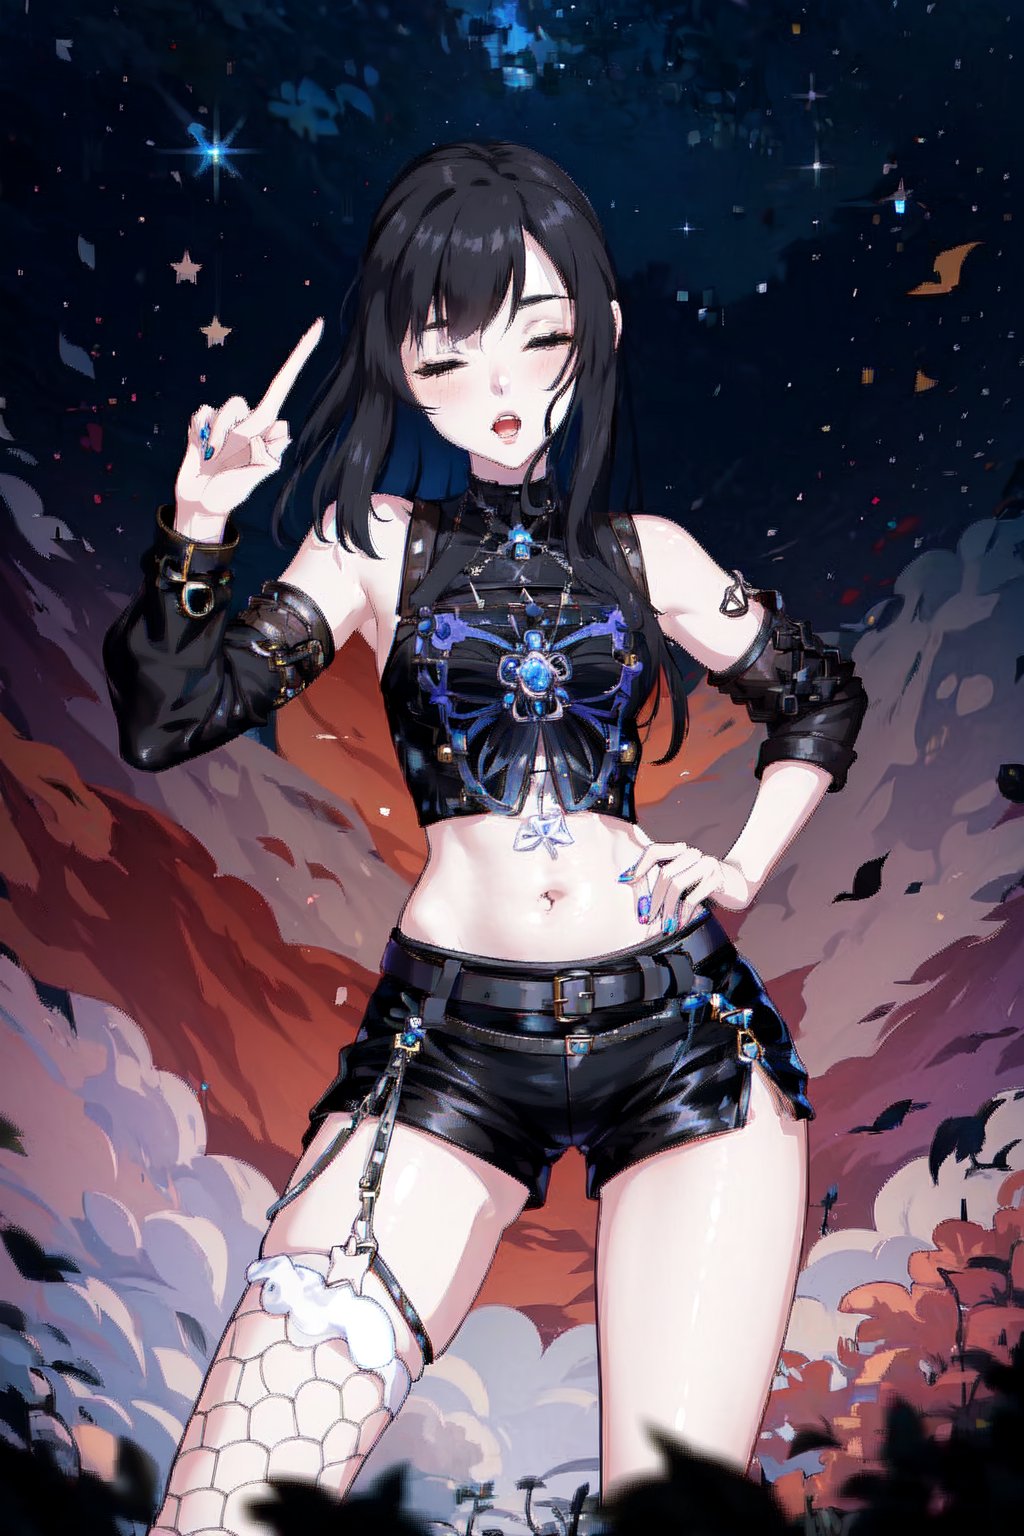 Ava00 (Eva00) is a Japanese idol Vtuber passionate about video games and Vocaloids. She loves to sing and share magical moments with her audience. With her long black hair adorned and her bright blue eyes, Ava00 captures everyone's attention. Her style is unique to her: she wears a crop top that leaves her shoulders exposed, black denim shorts, black fishnet stockings and short black boots size 40.

In addition to her musical talent, Ava00 stands out for her charisma and energy on stage, always interacting with her fans in a close and authentic way. She is often seen with one eye closed and one hand on her hip, leaning forward and pointing with one finger, with her head slightly tilted and in a contrapposto stance with her legs spread. Her provocative look and outfit sometimes include elements of animal costumes and school tights, adding a touch of whimsy to her presence.

Ava00 is known for her ability to create unforgettable moments in her streams, combining her love for music and video games with her charming personality and distinctive appearance.